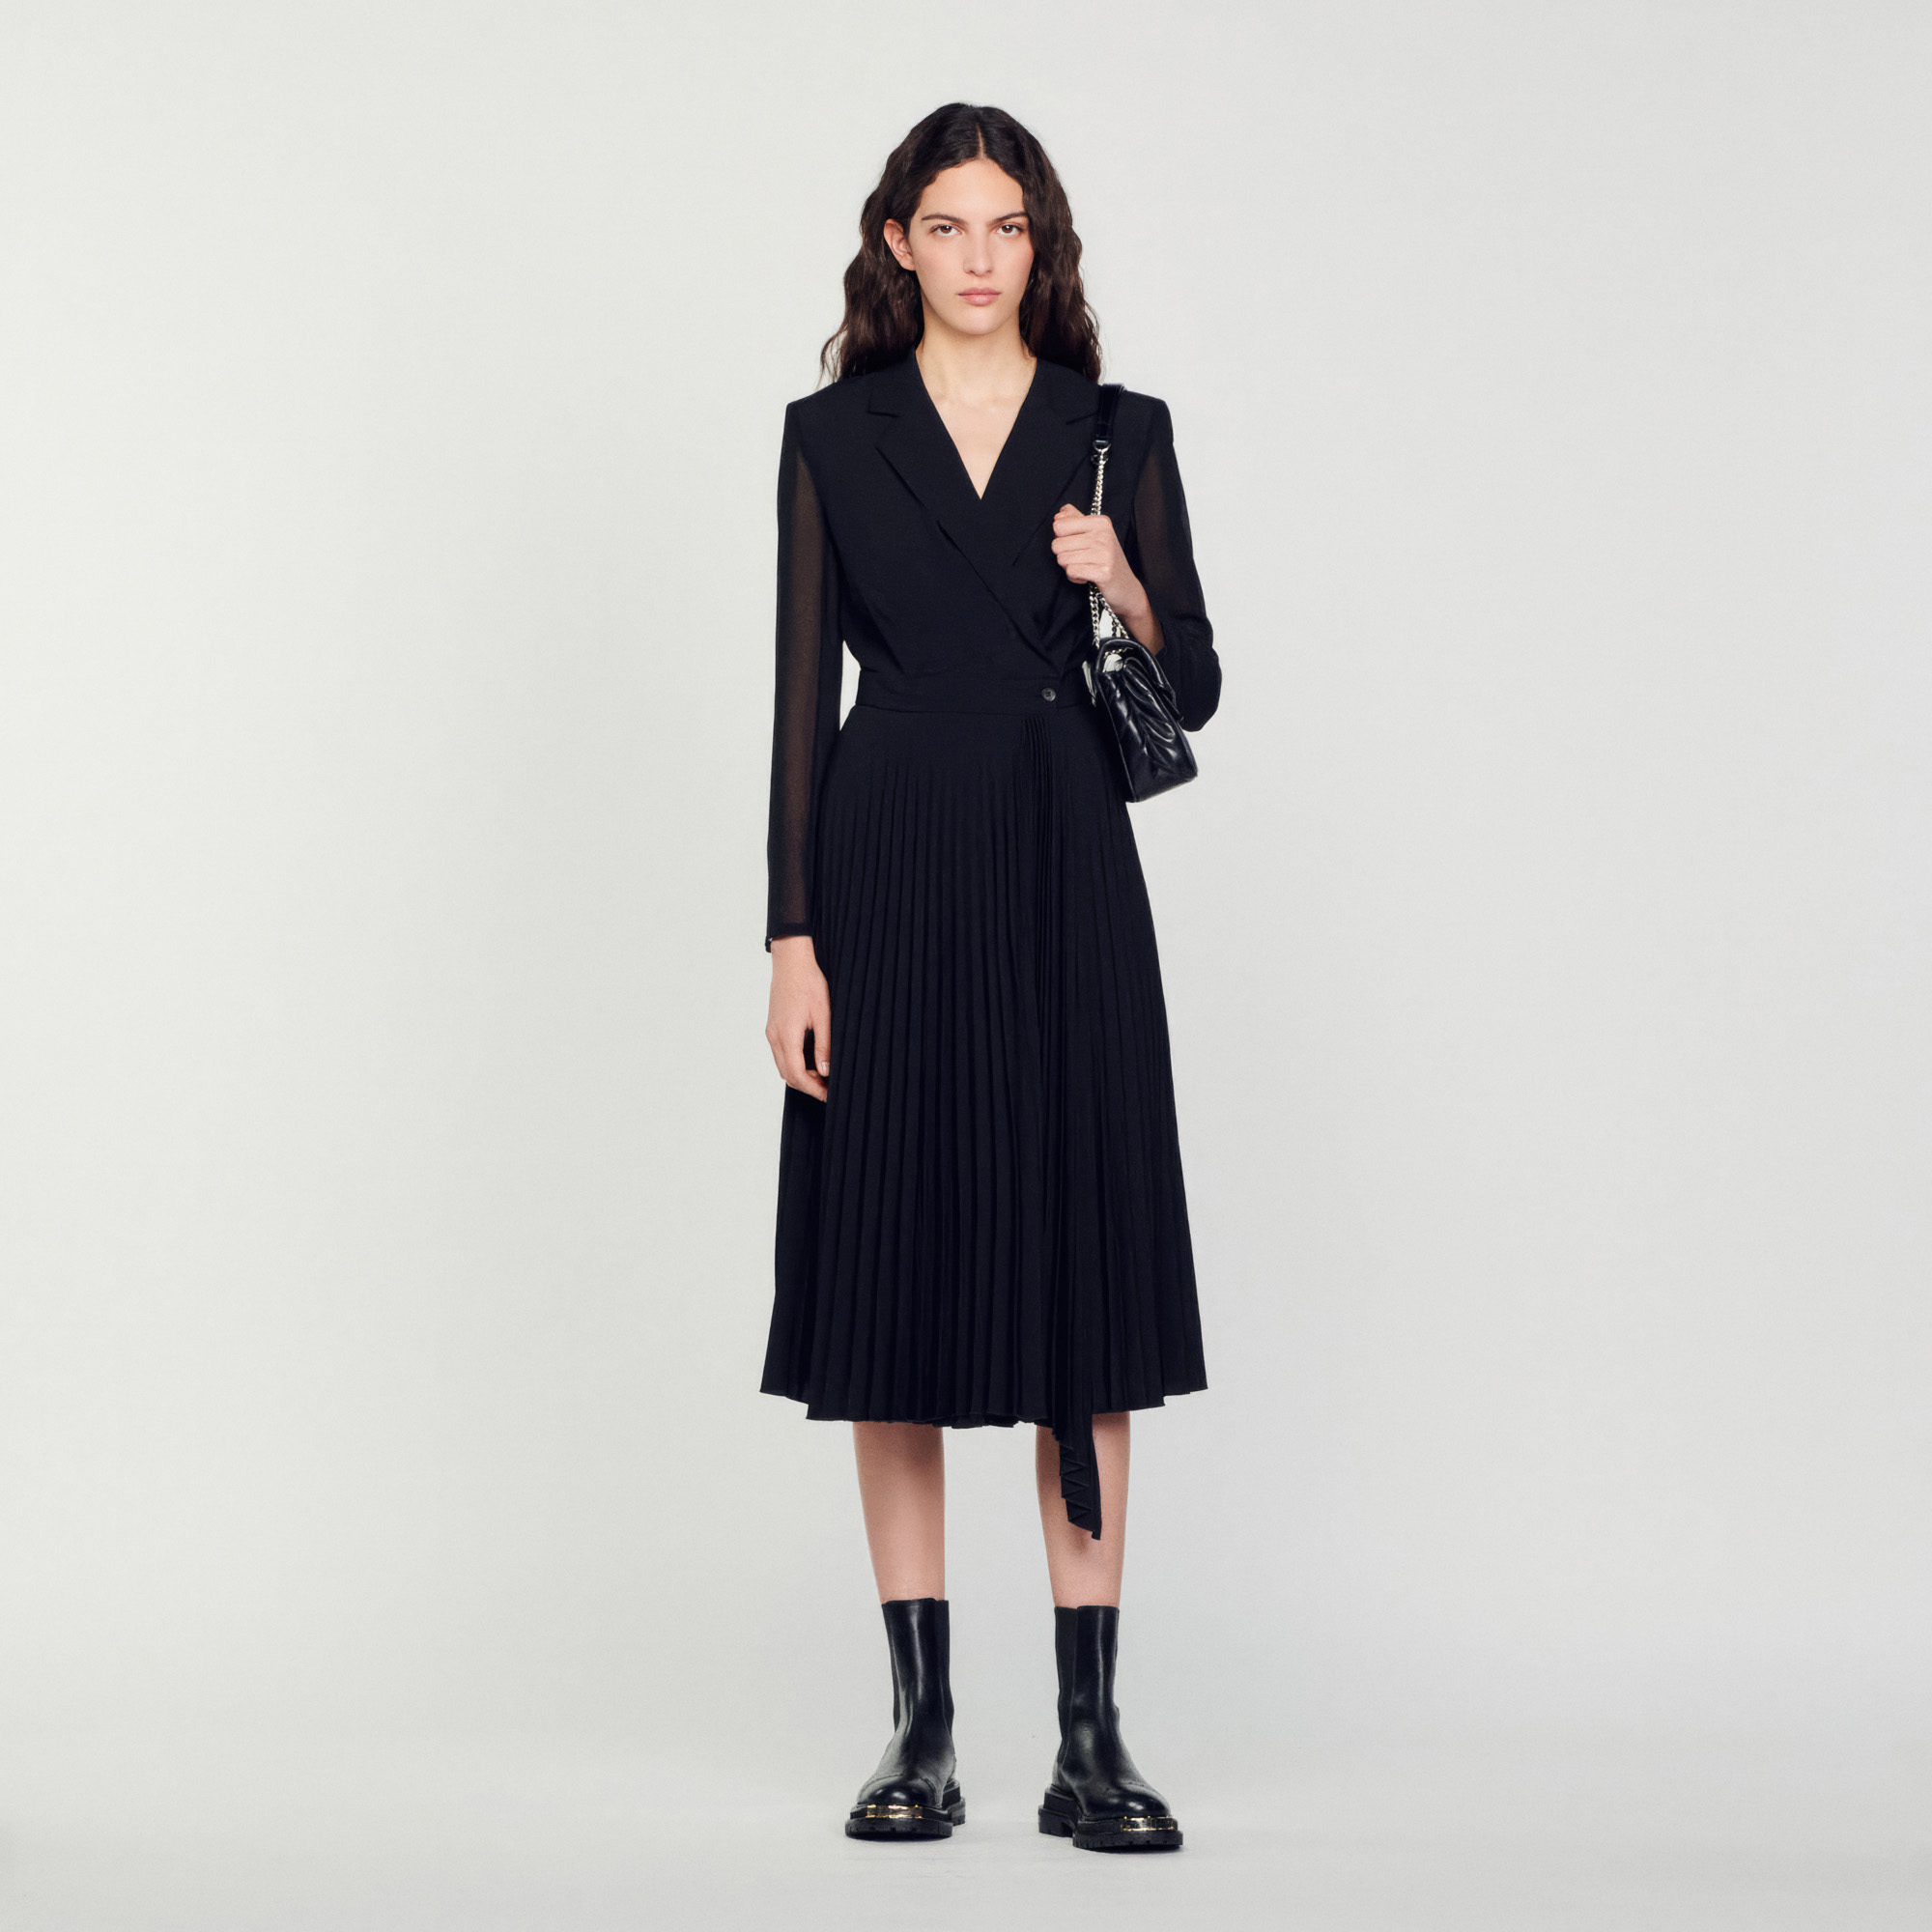 Sandro polyester Secondary fabric: Sandro women's dress â€¢ Crossover tailored collar fastened with a button â€¢ Long sheer sleeves â€¢ Pleated asymmetric skirt This item's main material is at least 50% recycled